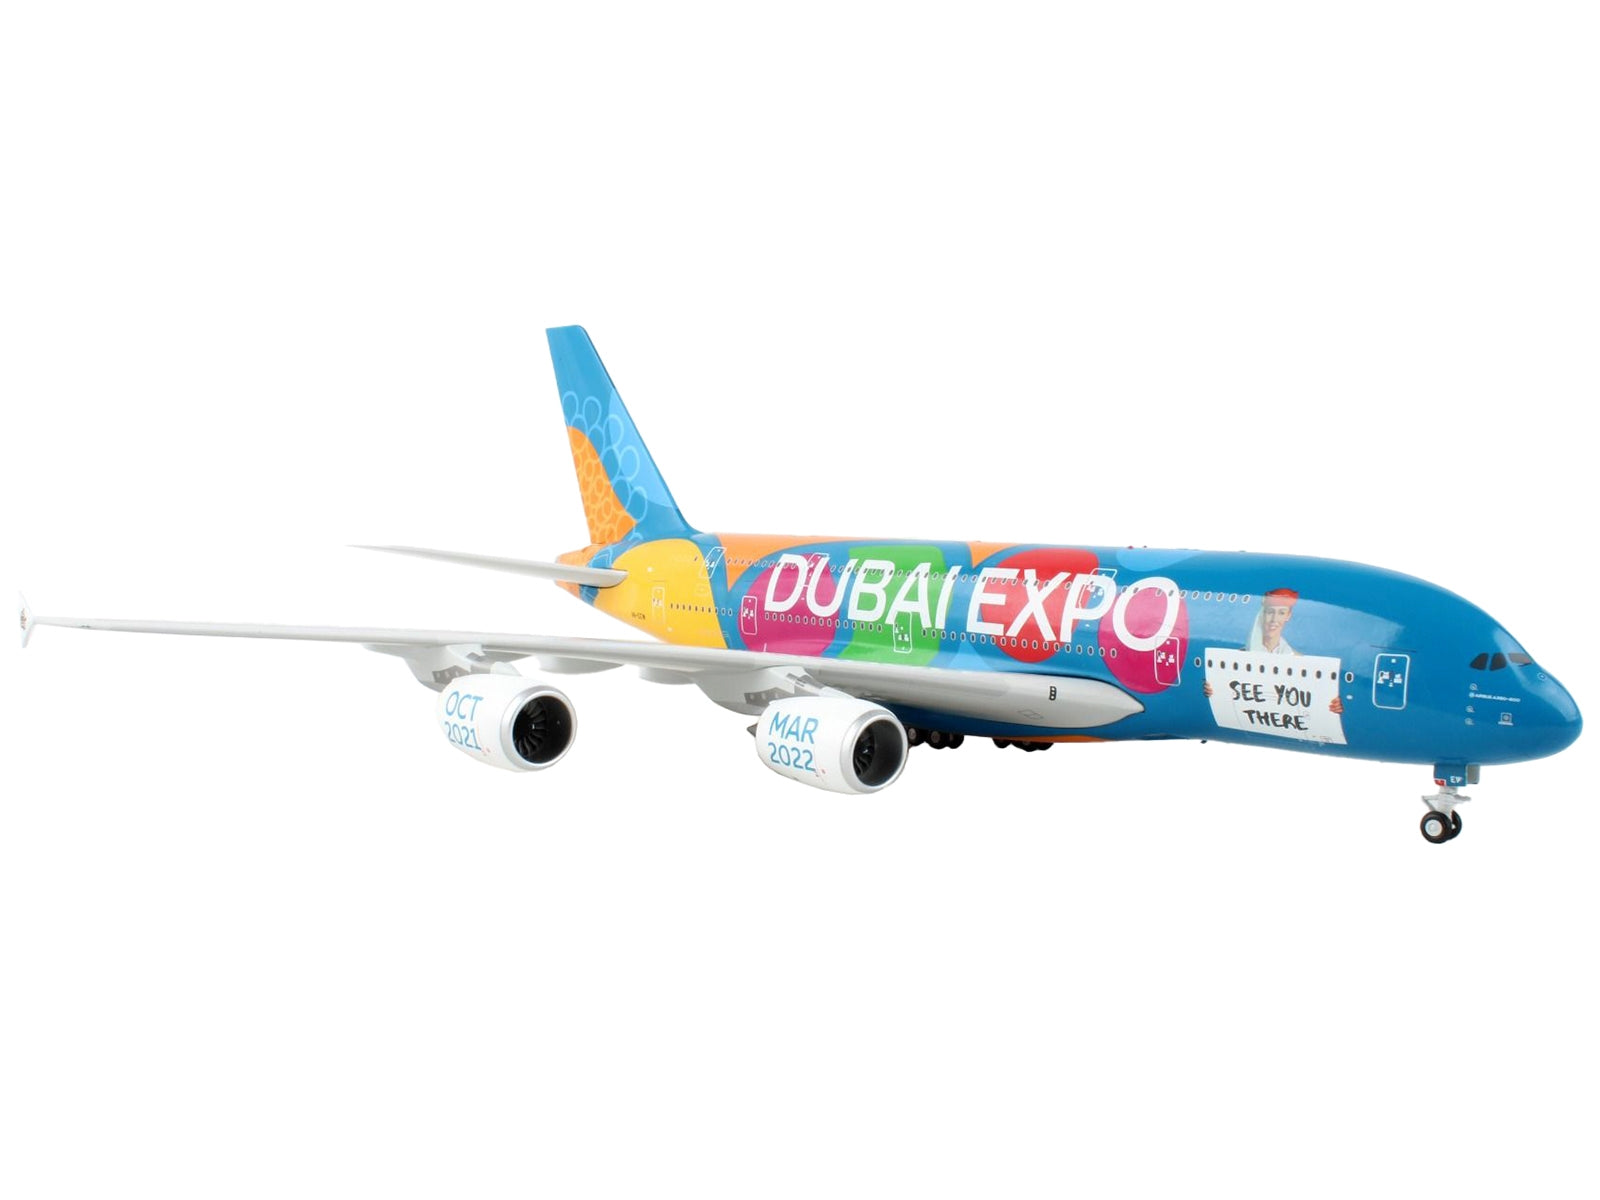 Airbus A380-800 Commercial Aircraft "Emirates Airlines - Dubai Expo" "Gemini 200" Series 1/200 Diecast Model Airplane by GeminiJets